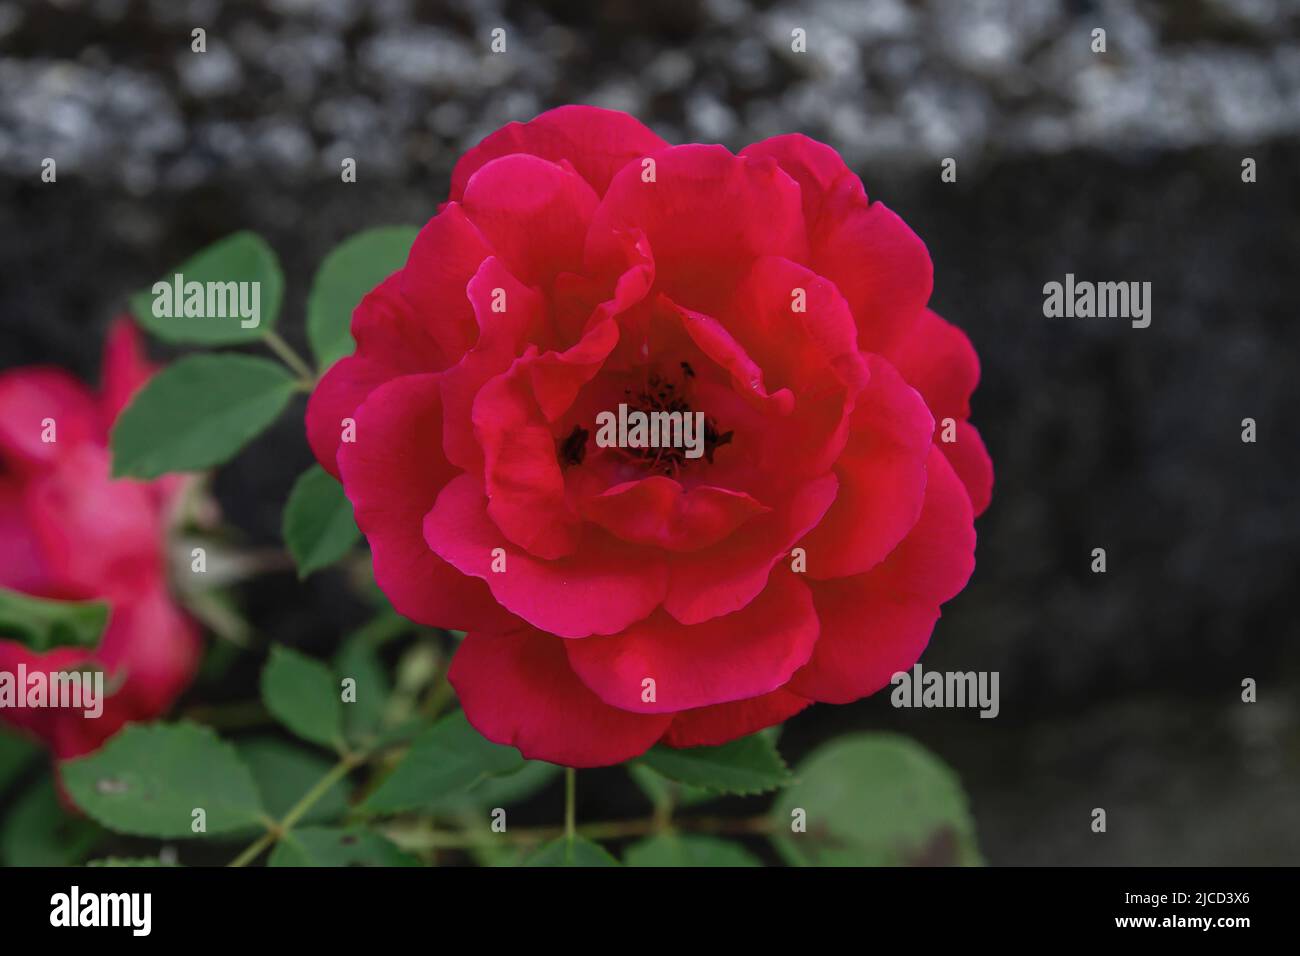 Apothecary Rose (Rosa Gallica) crimson red colored flower Stock Photo